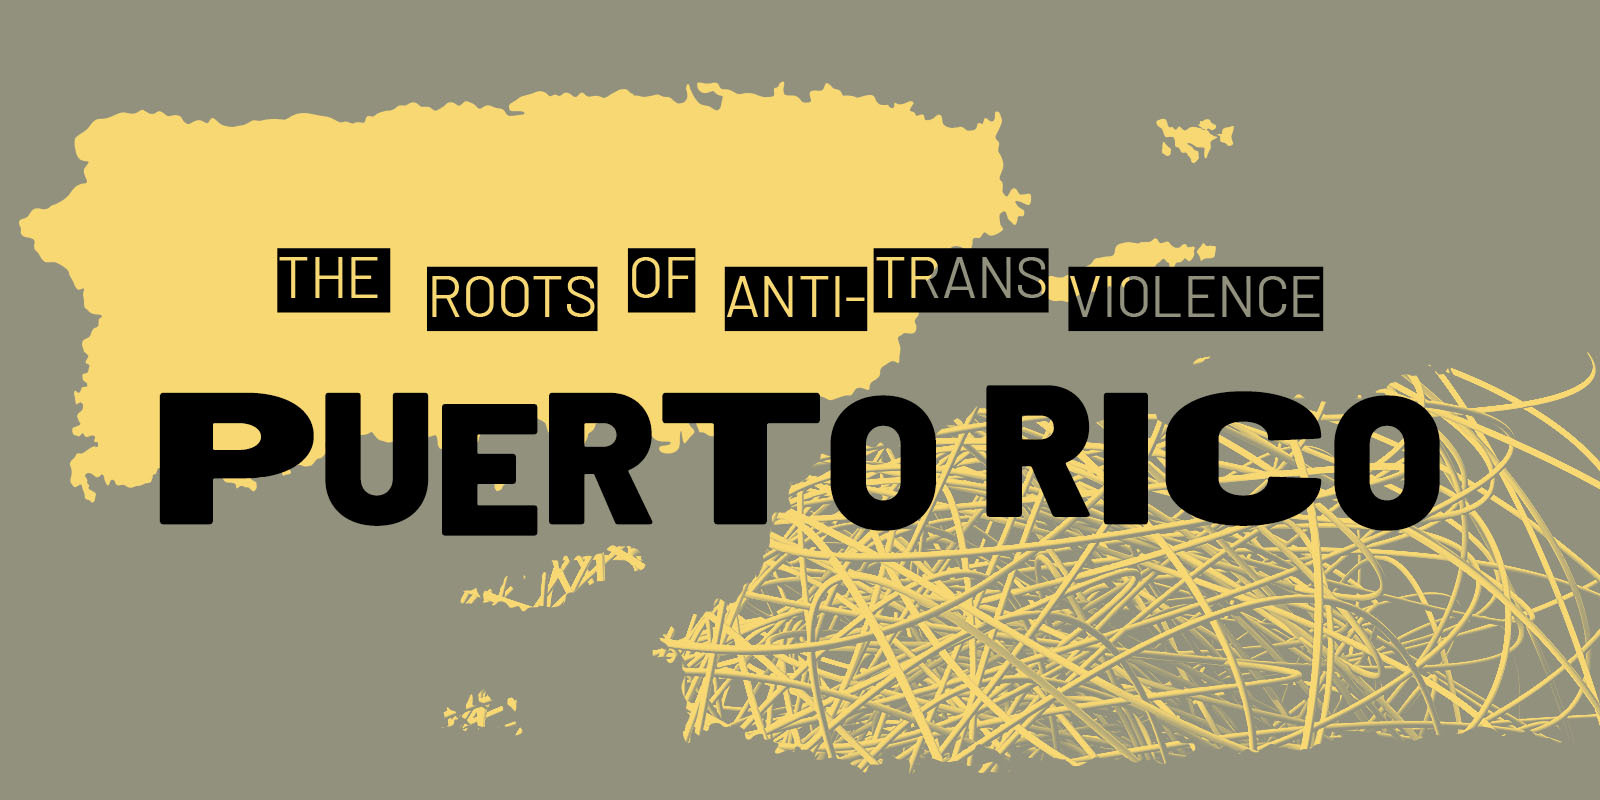 The Roots of Anti-Violence: Puerto Rico is set against an yellow background.